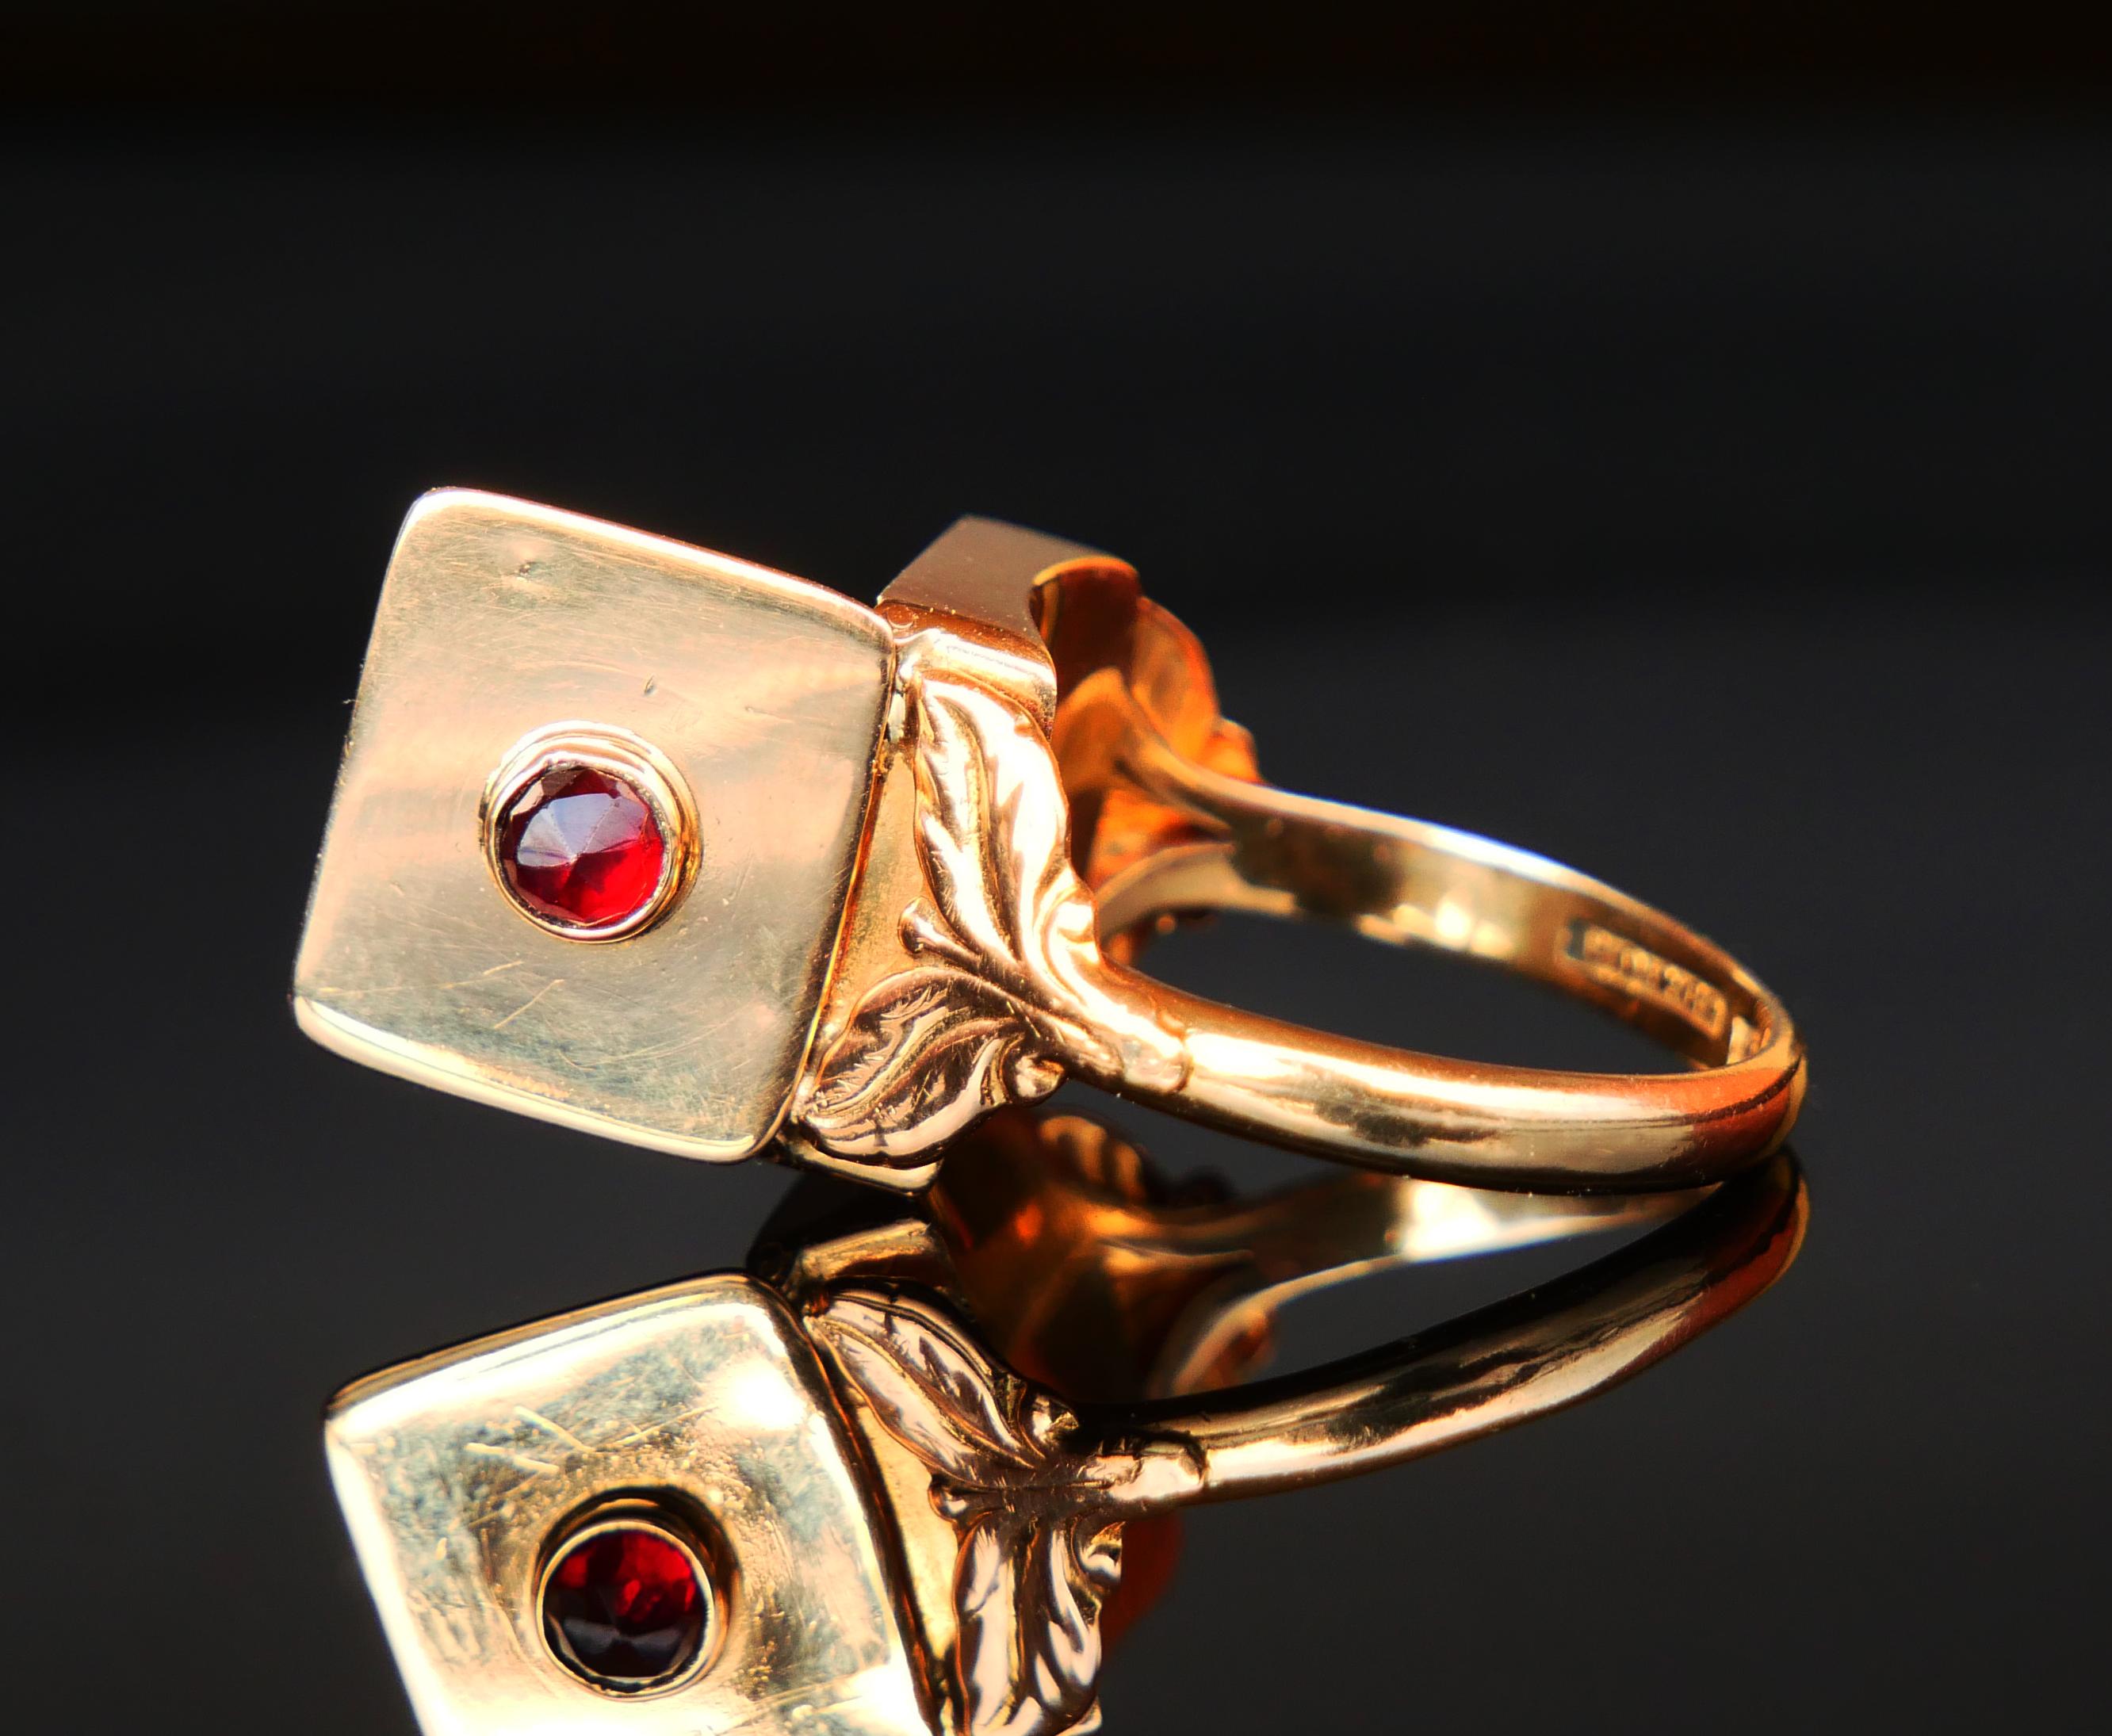 Poison Ring in solid 18K Yellow Gold with crown being a hidden compartment 13 mm x 11 mm x 5.5 mm deep covered with secure and tight hinged lid decorated with rose cut Garnet. Unisex model. 

Made in Sweden in the year 1935 ( mark I8 ). Workshop